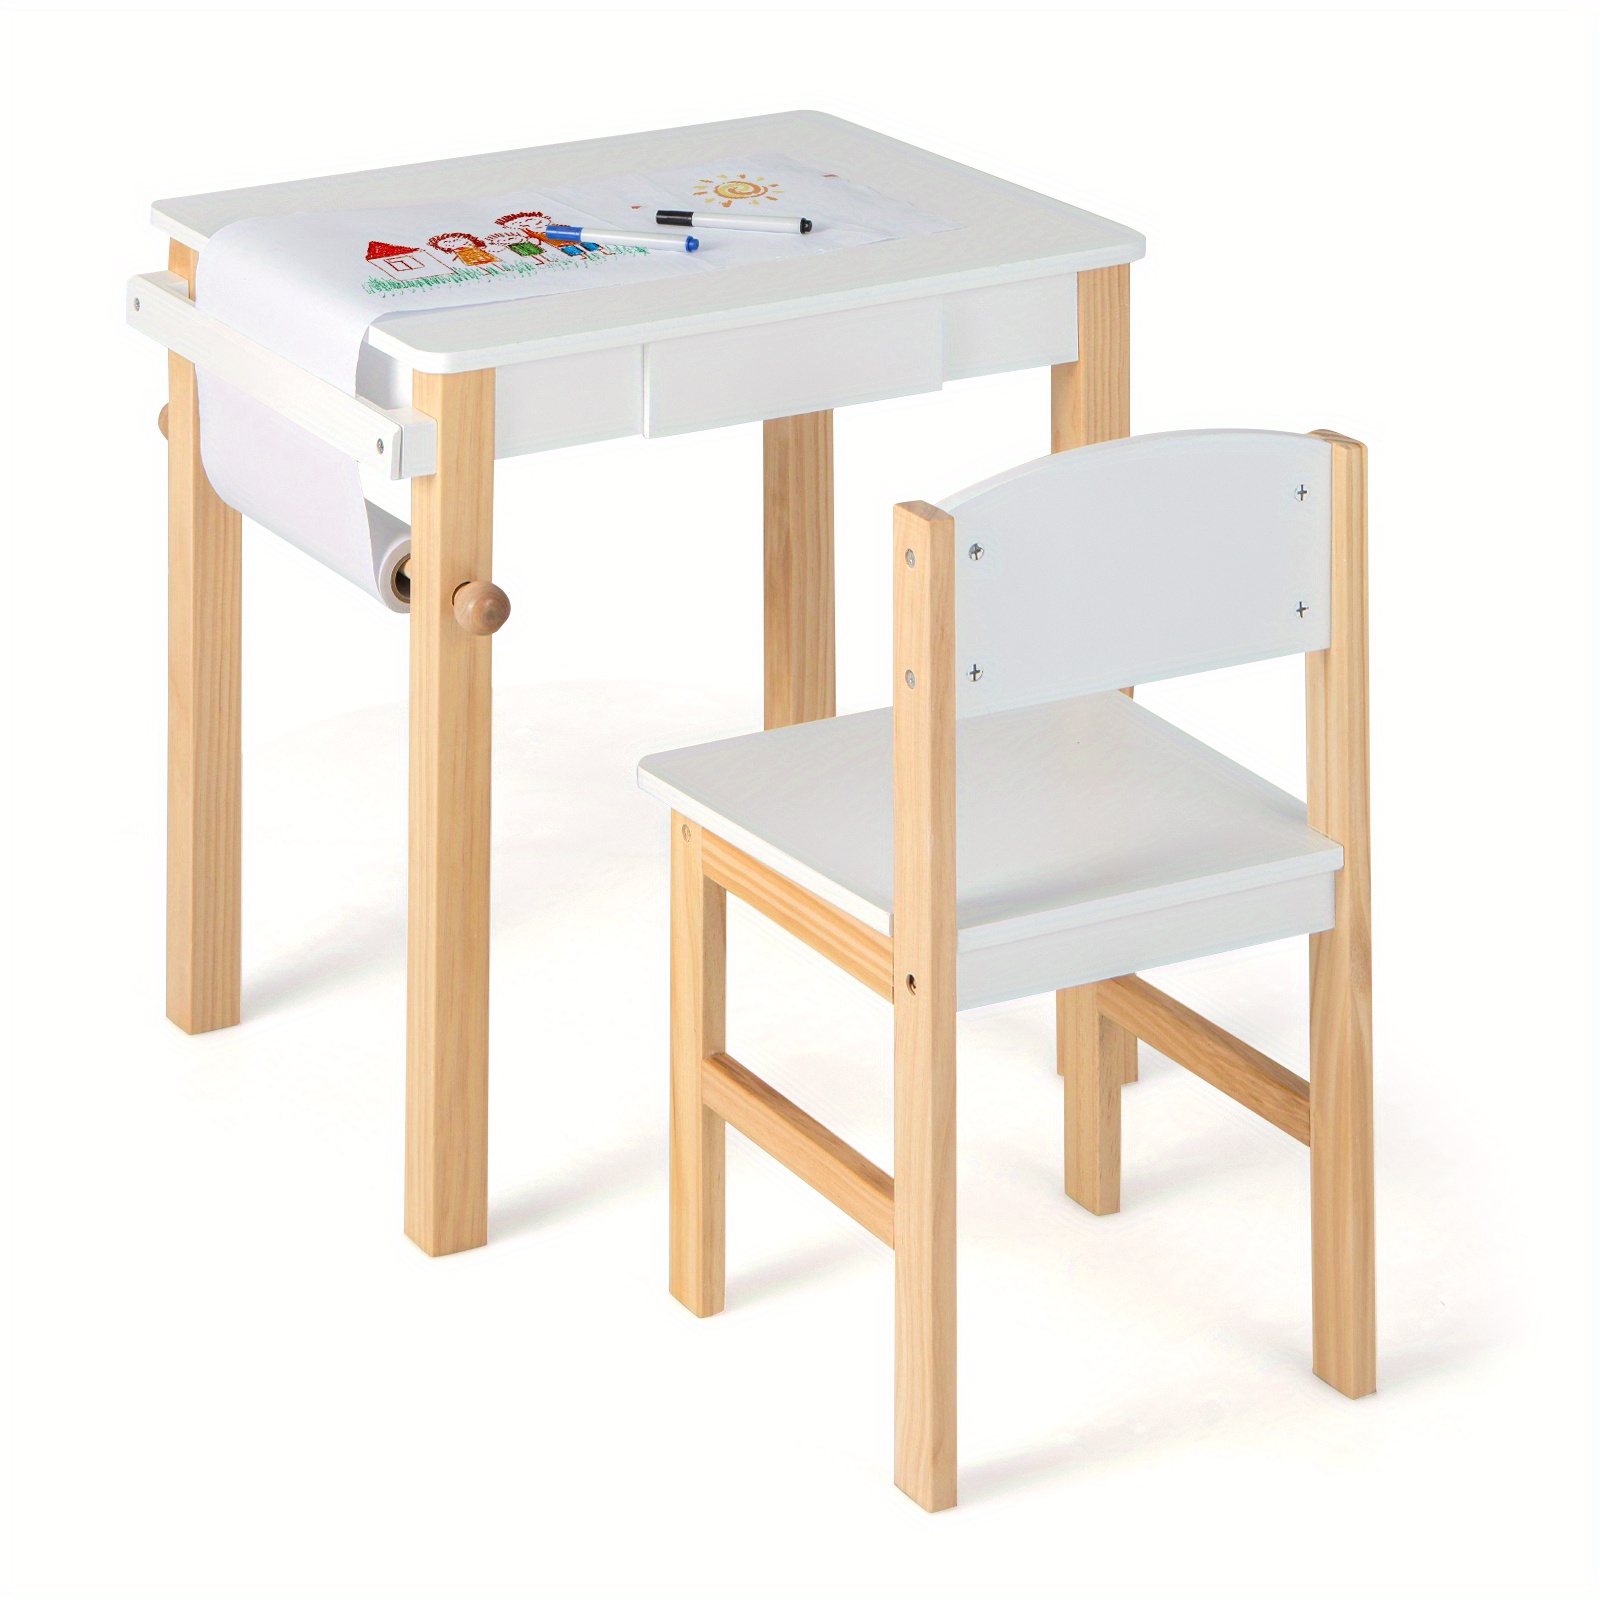 

Lifezeal Kids Table And Chair Set Wooden Activity Drawing Study Desk W/paper Roll Drawer